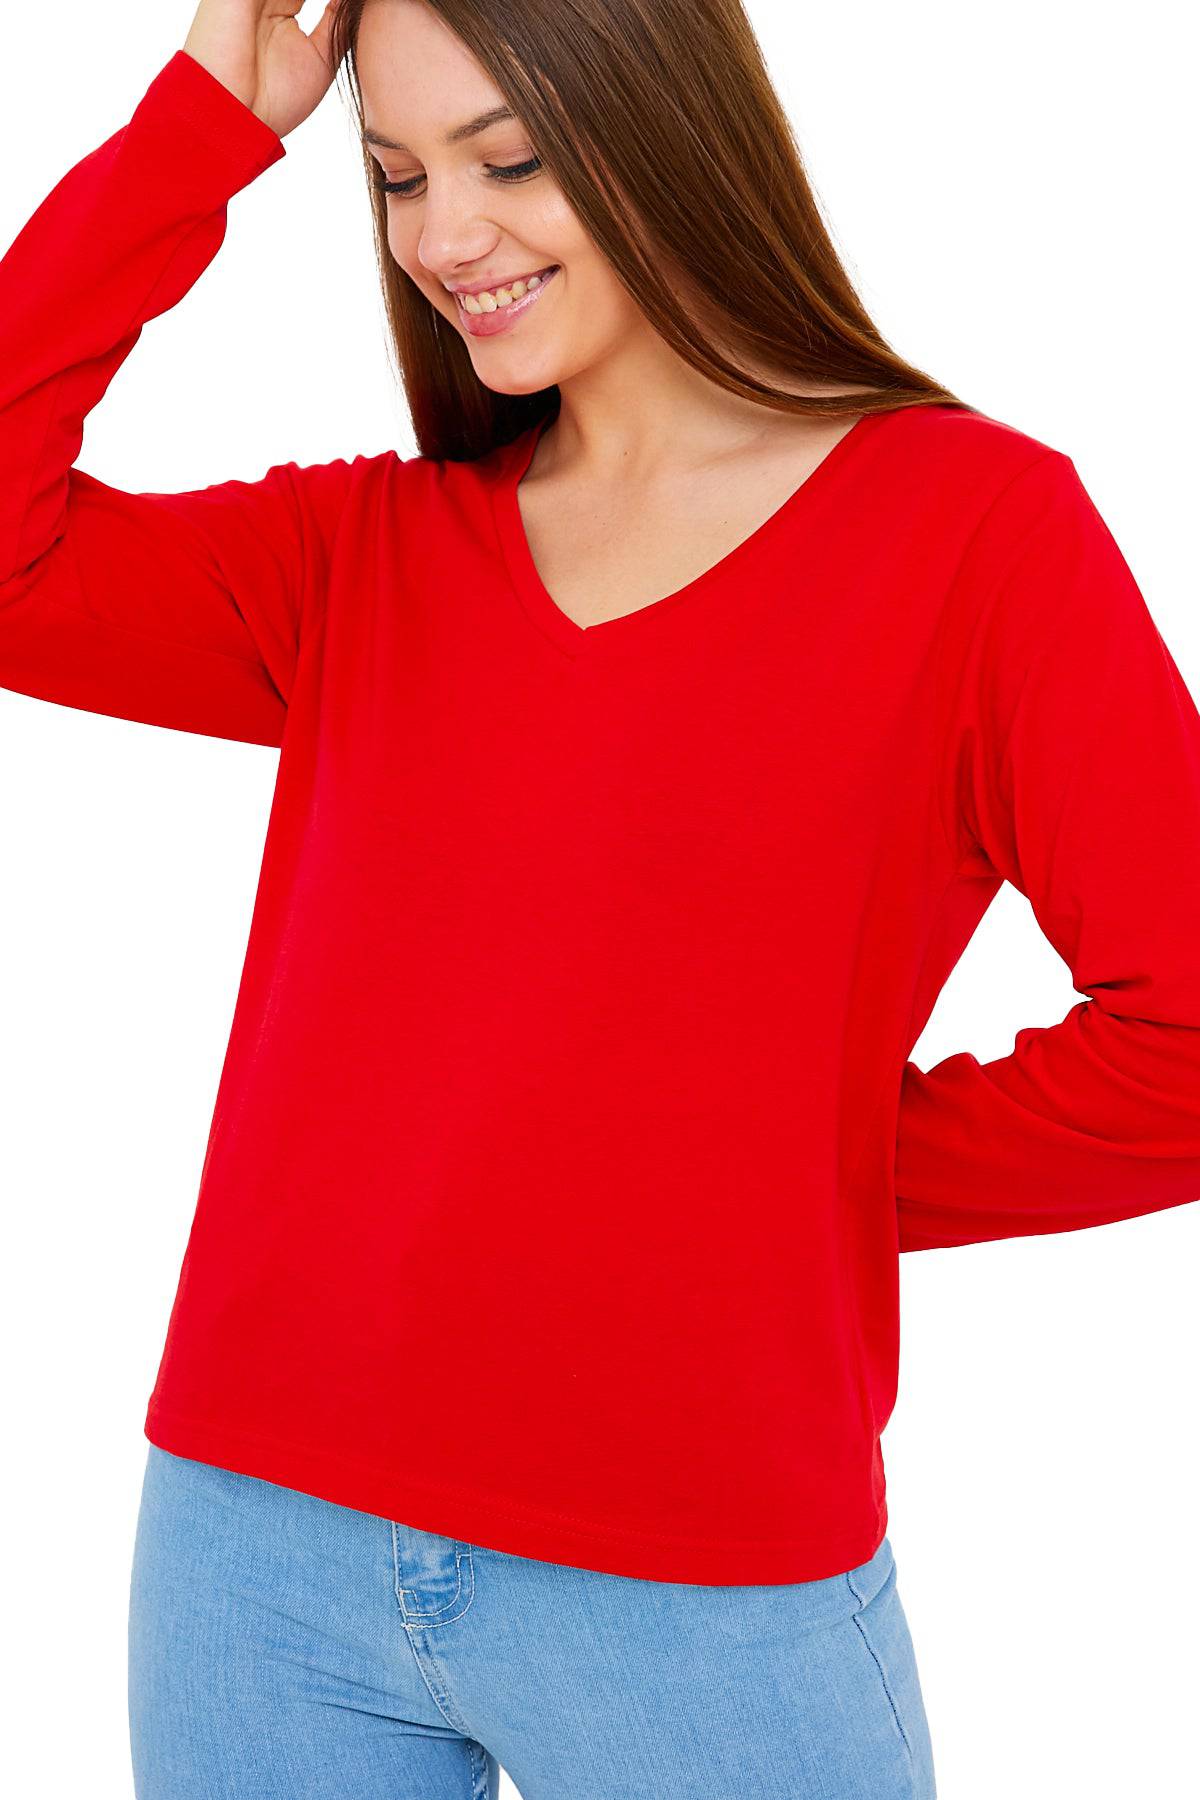 Long Sleeve V Neck T-Shirts for Women & Girls - Colorful Pima Cotton-119